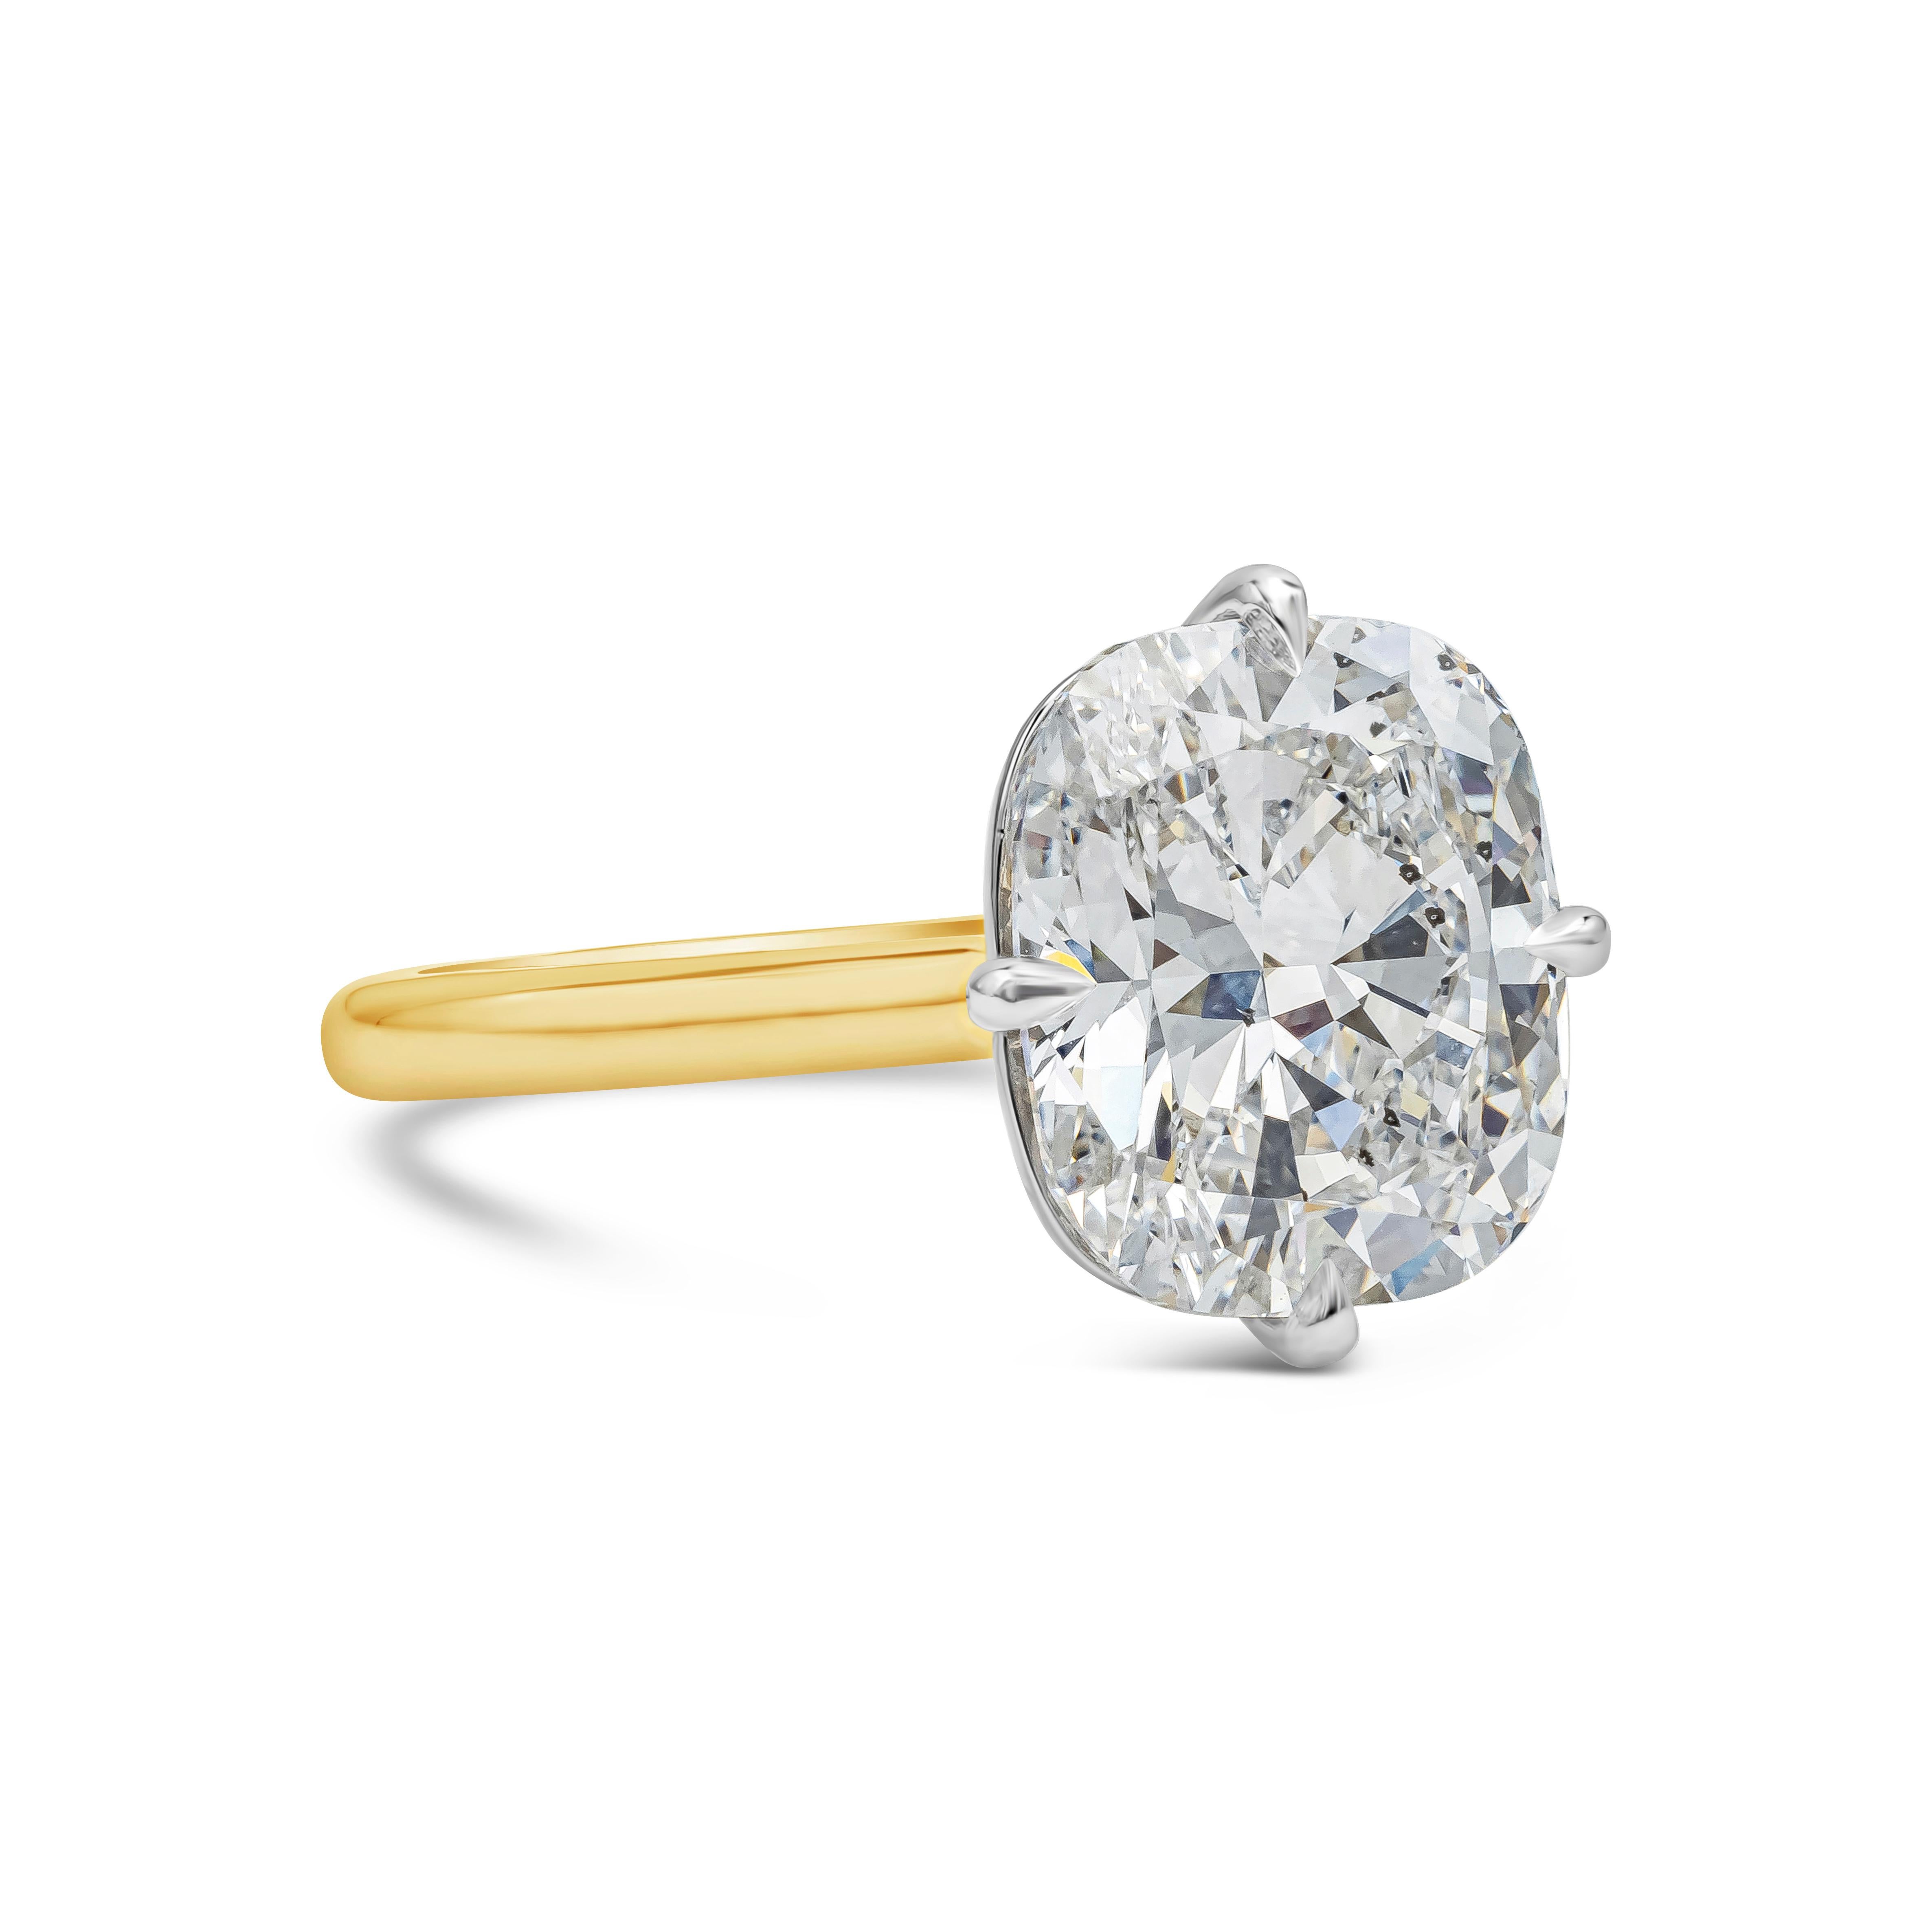 A beautiful solitaire engagement ring, showcasing a 5.02 carats cushion cut diamond certified by GIA as D color and SI2 clarity, set on a unique compass basket setting made of platinum. Basket is set on a thin 18K yellow gold shank. An amazing piece